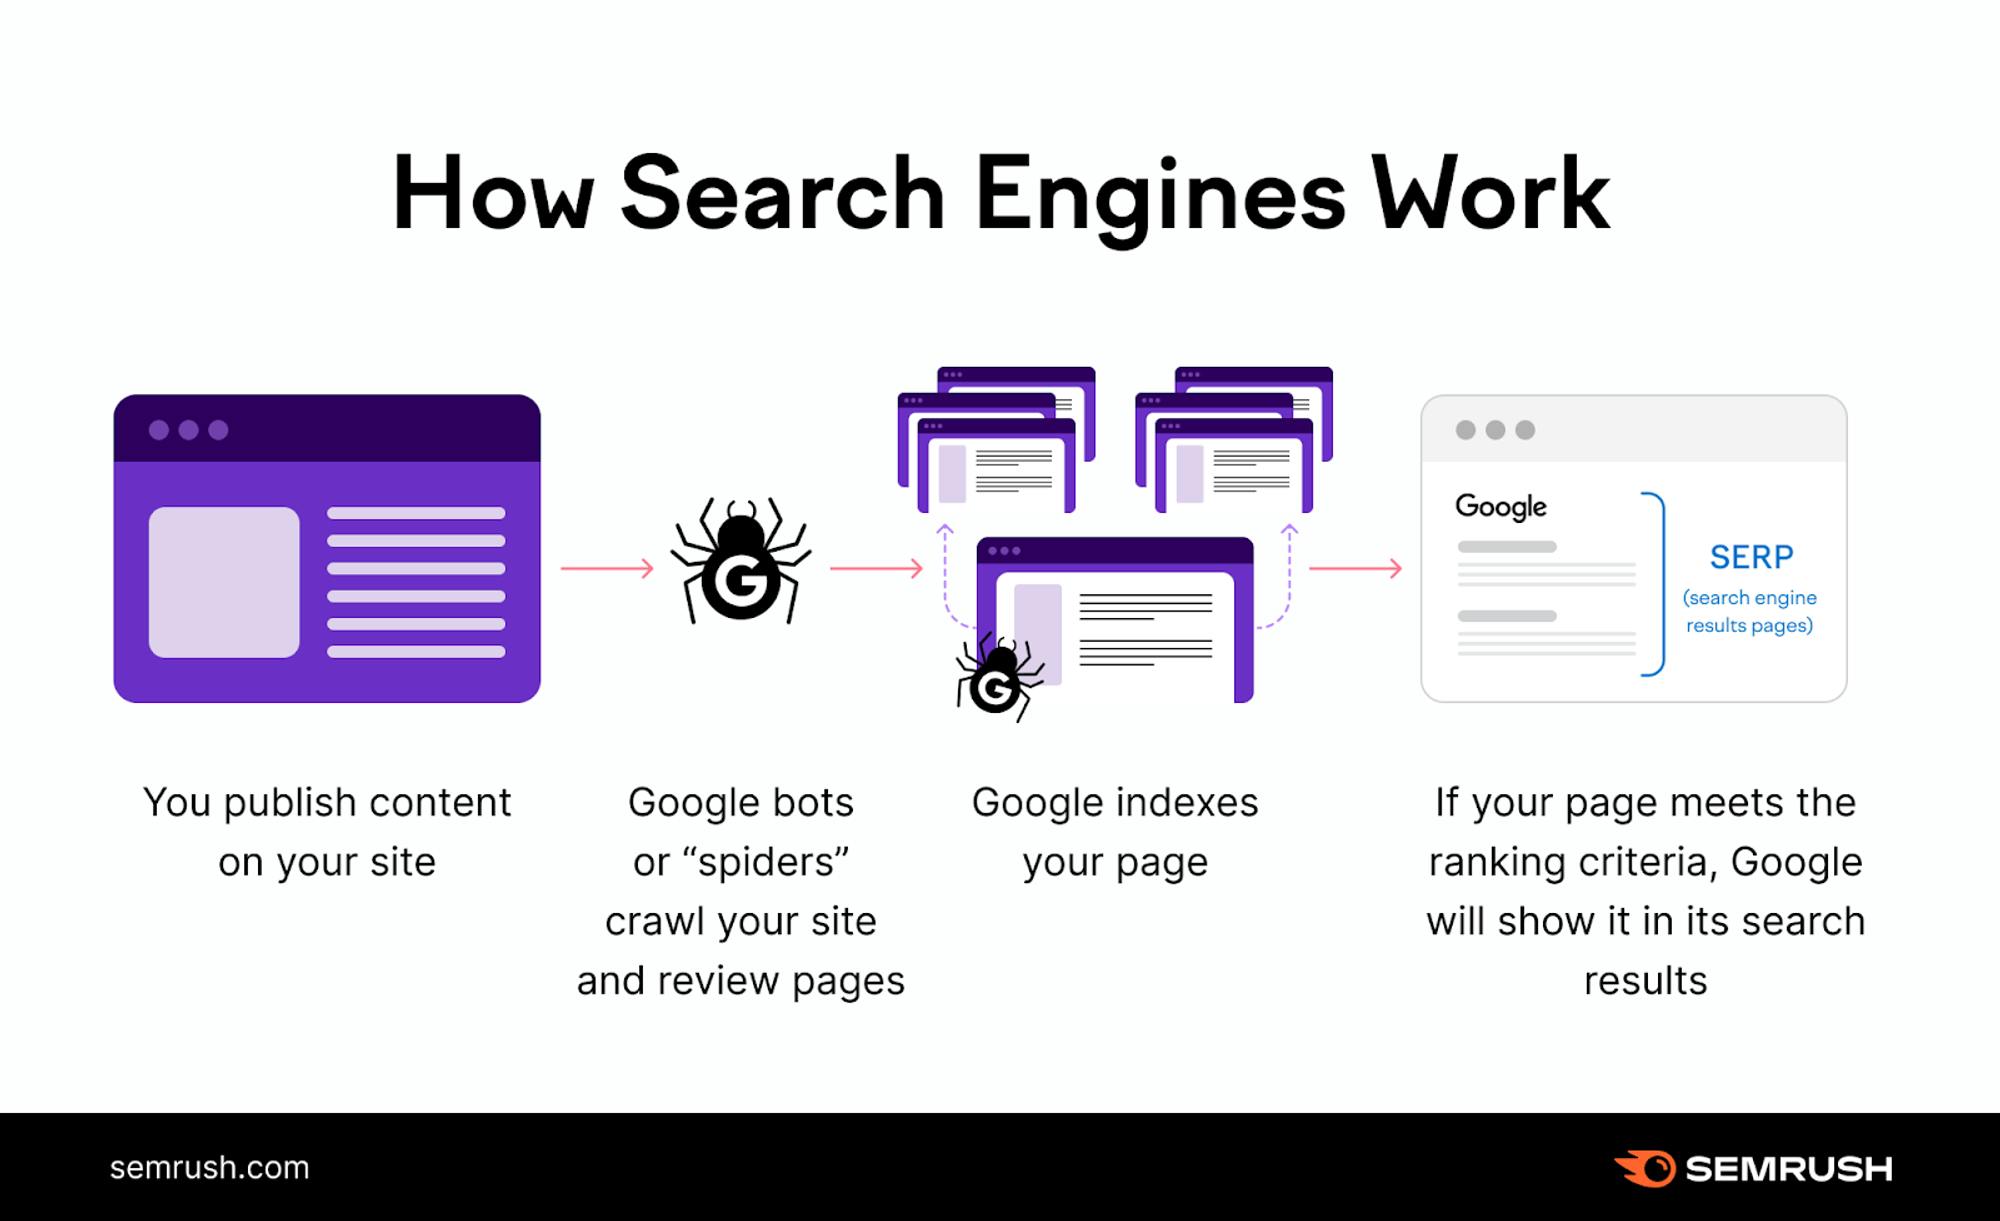 How search engines work diagram.